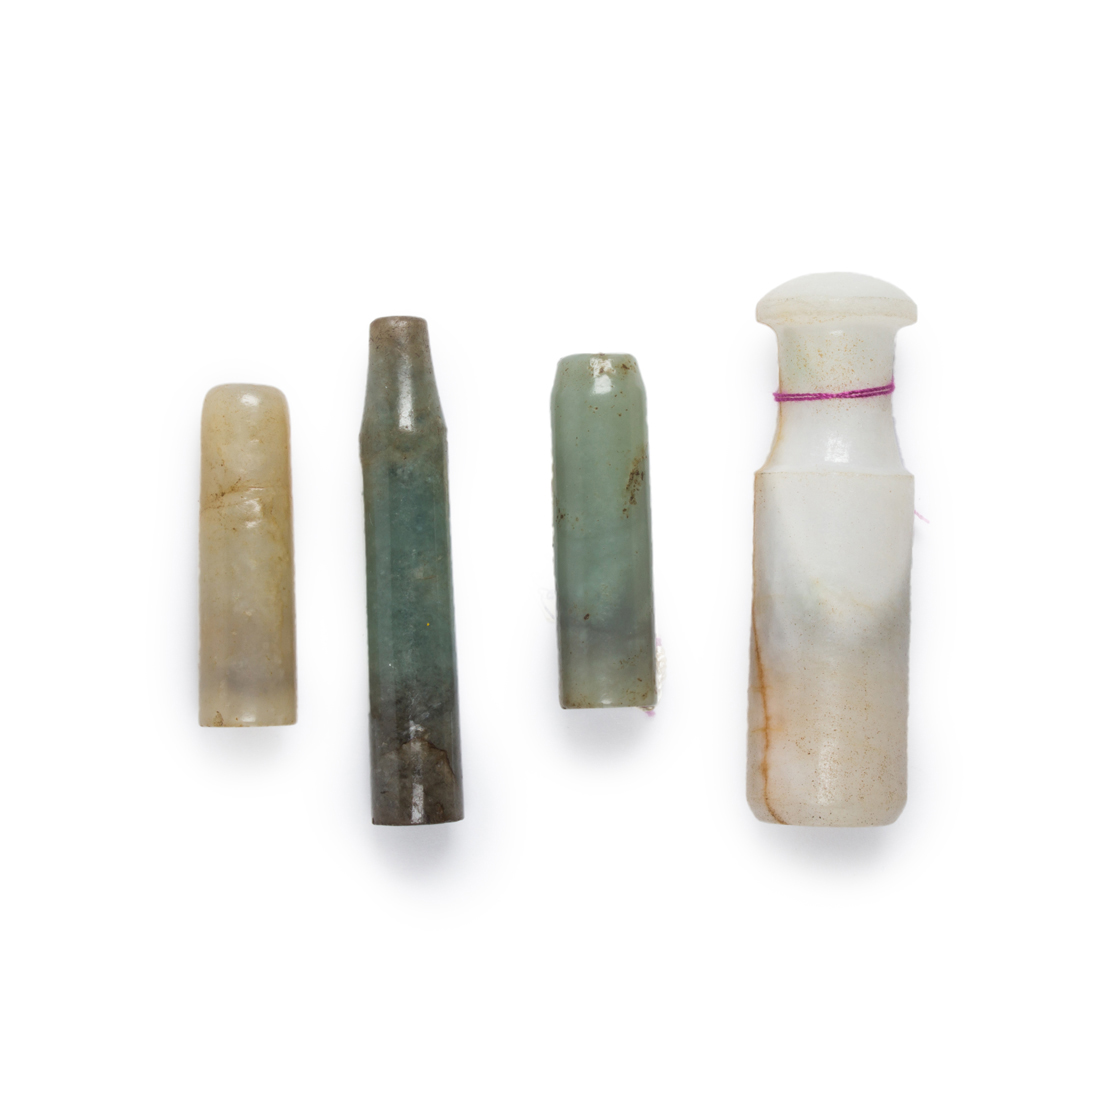  LOT OF 4 CHINESE JADE CIGARETTE 2d29df